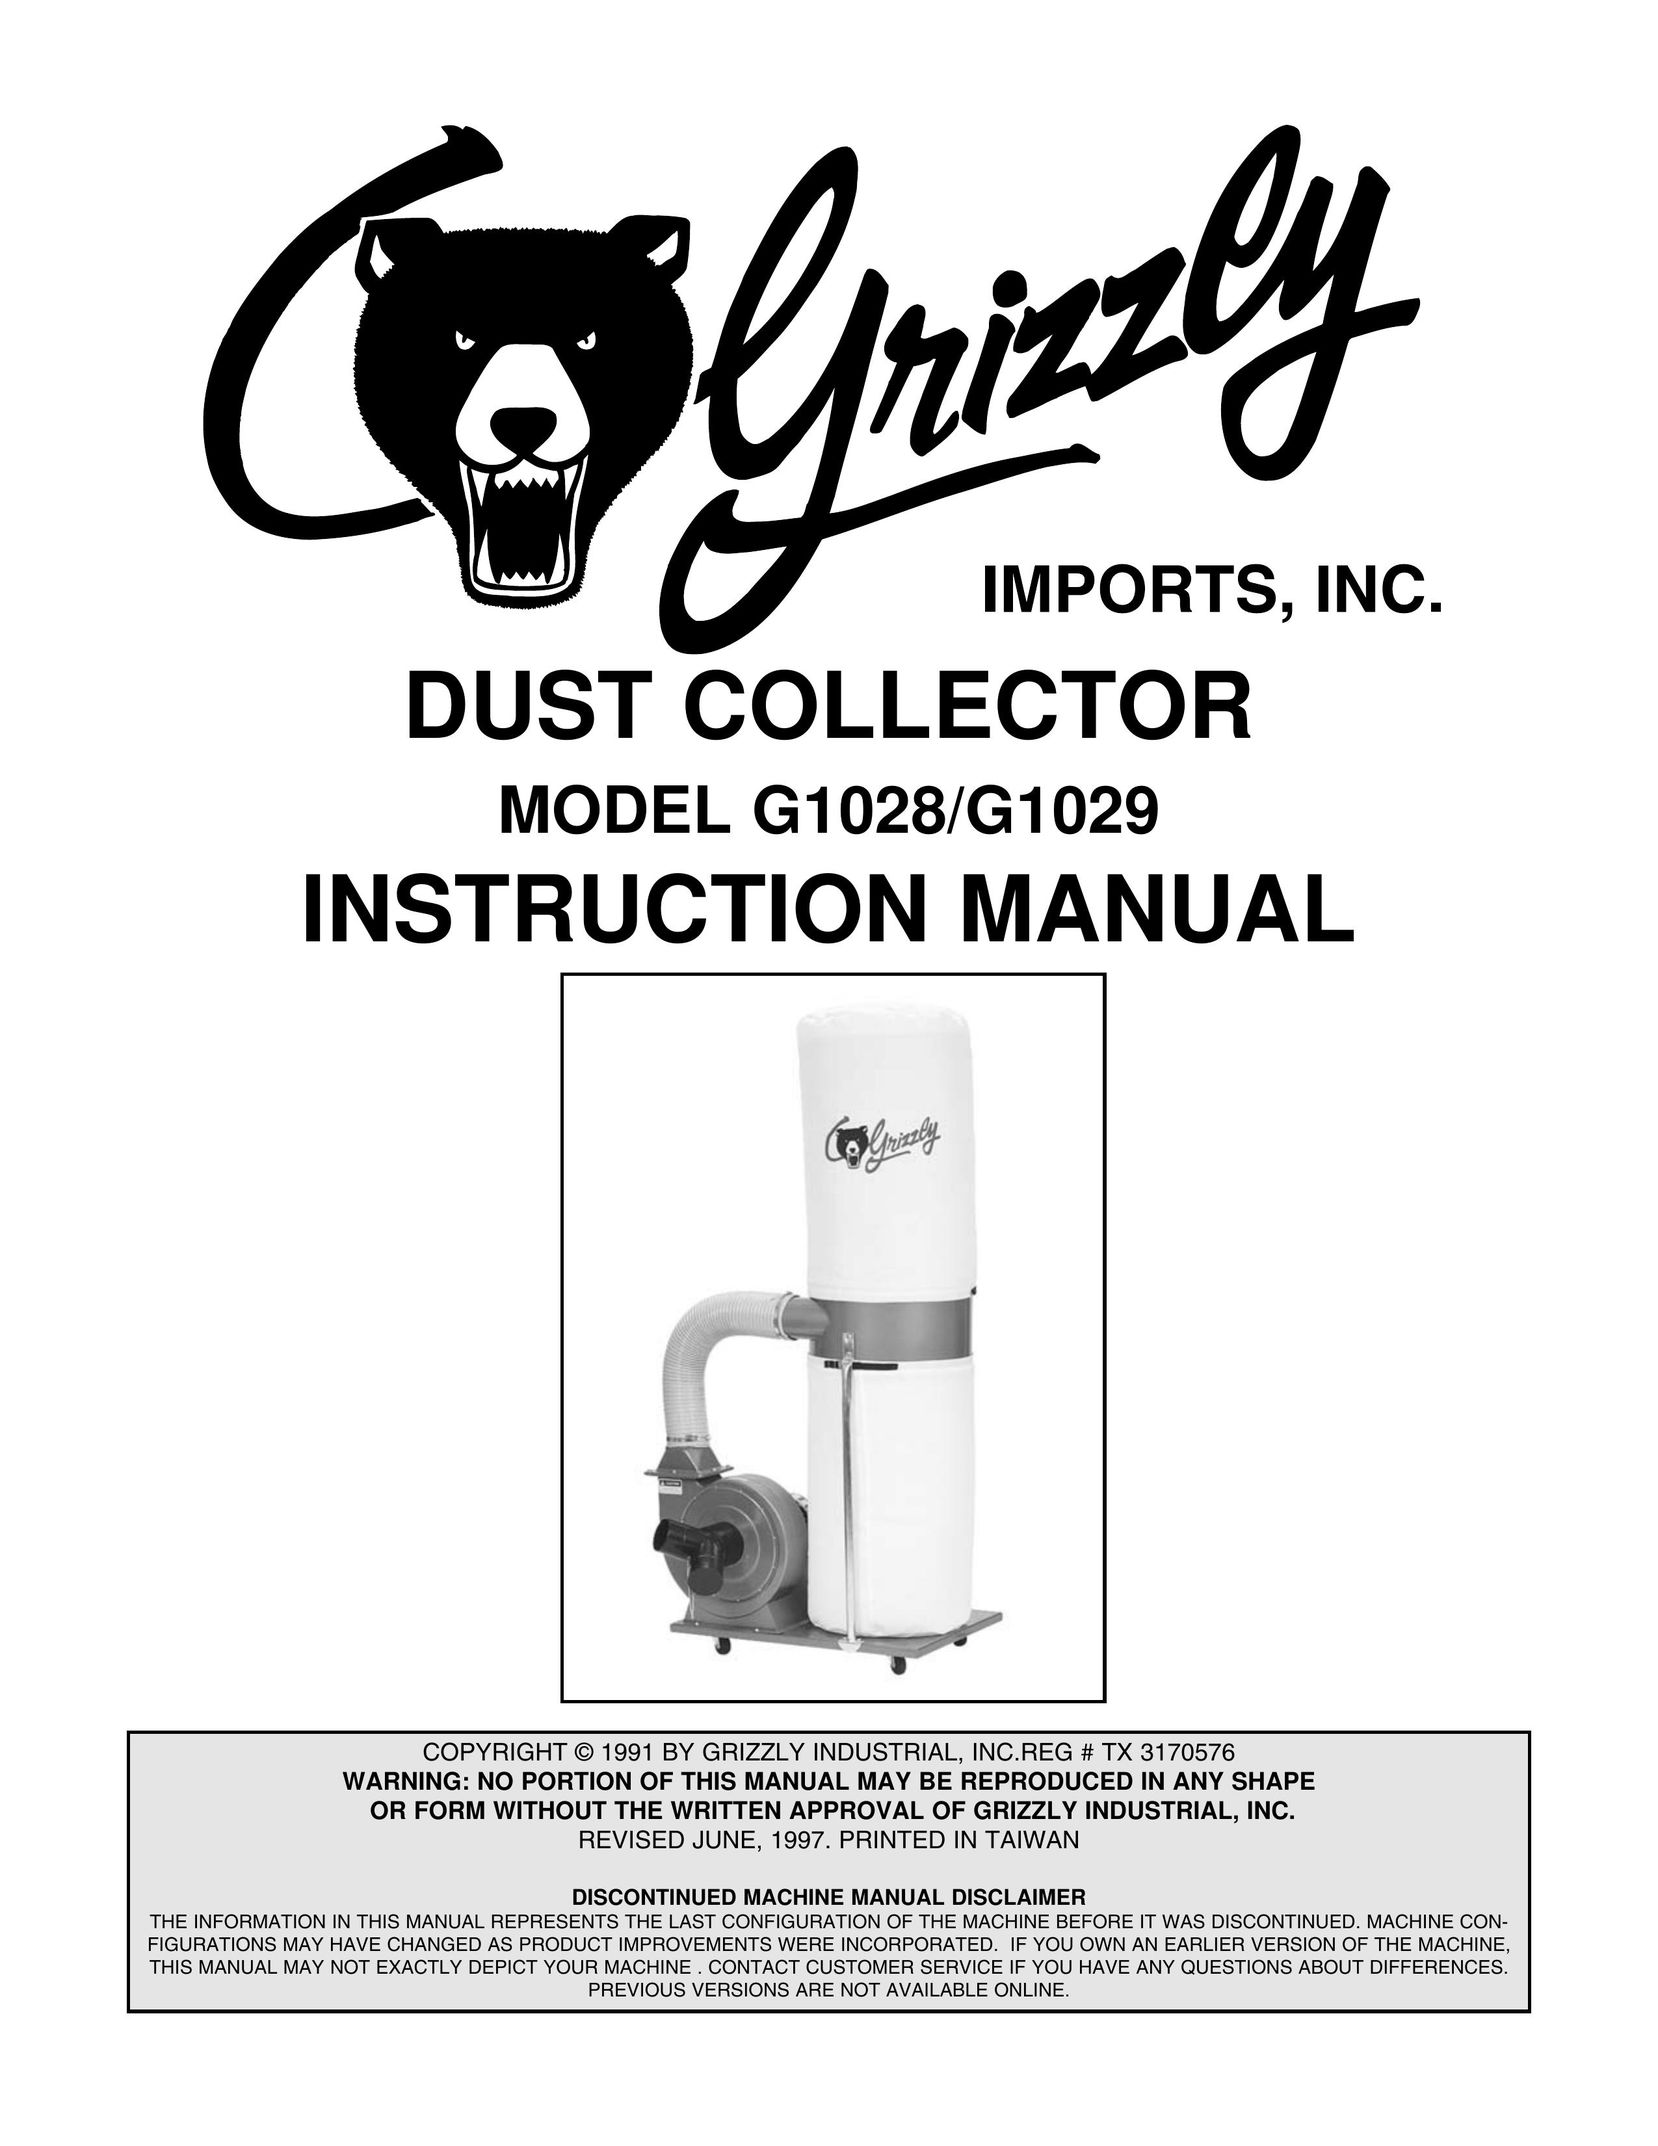 Grizzly G1028 Dust Collector User Manual